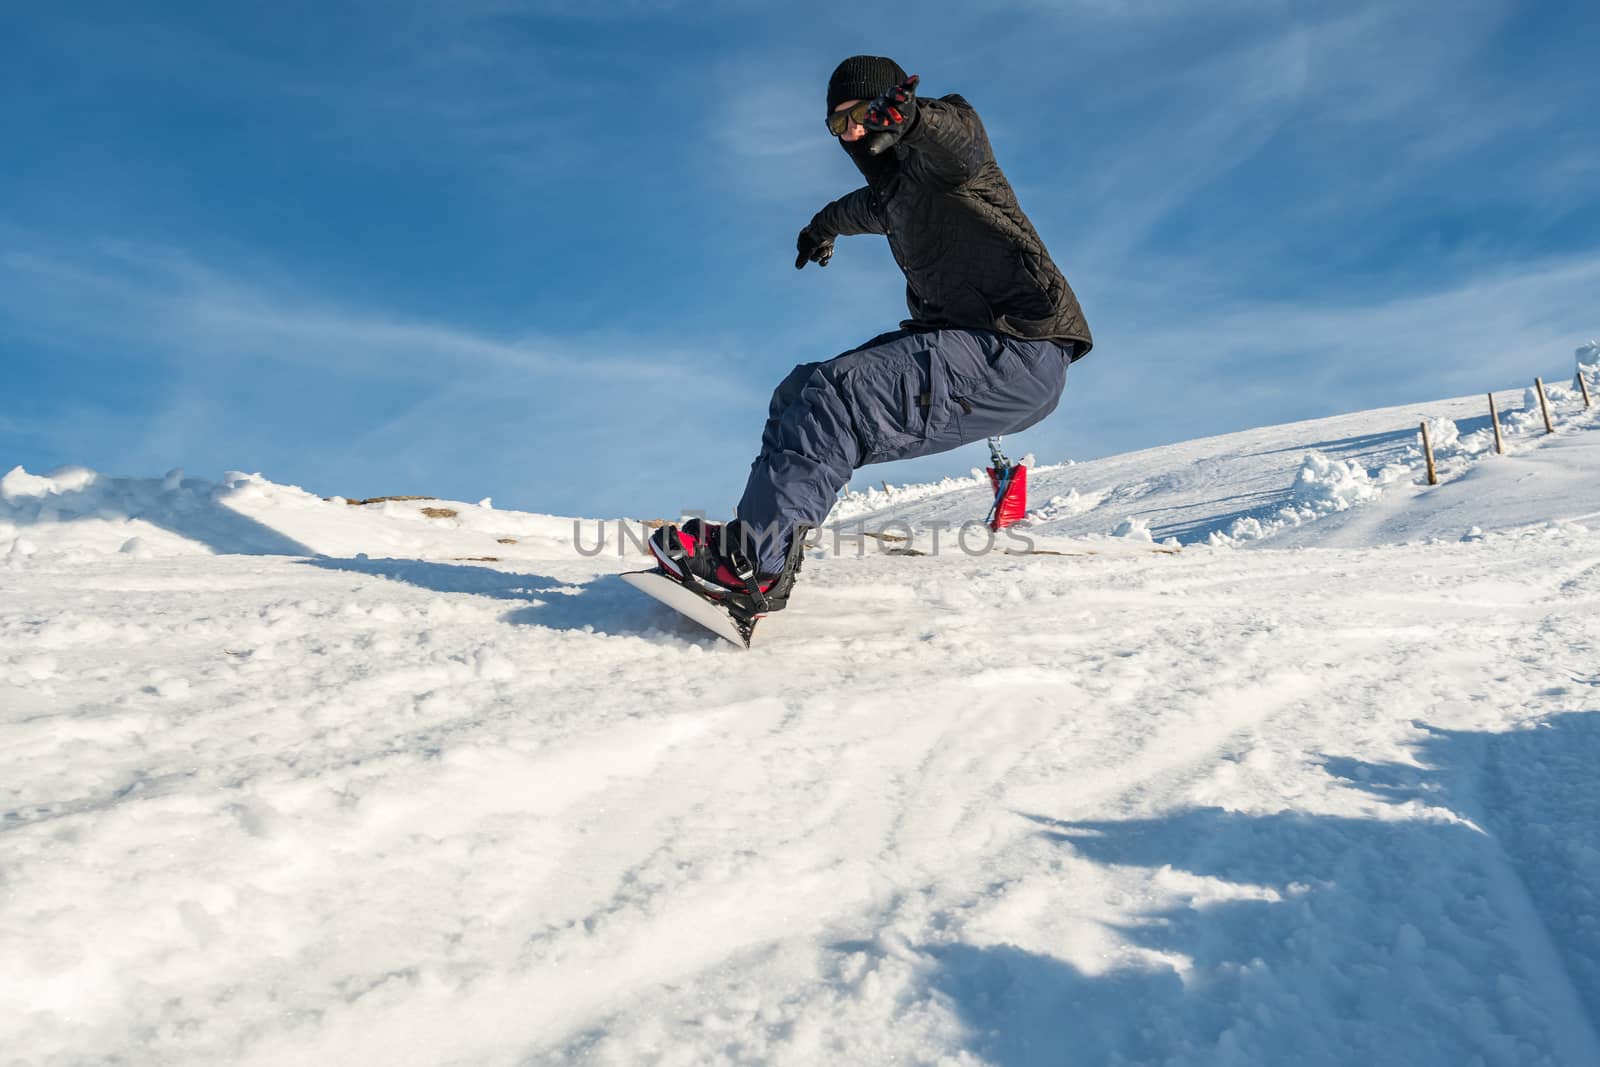 Snowboard freerider in the mountains against in blue sky.